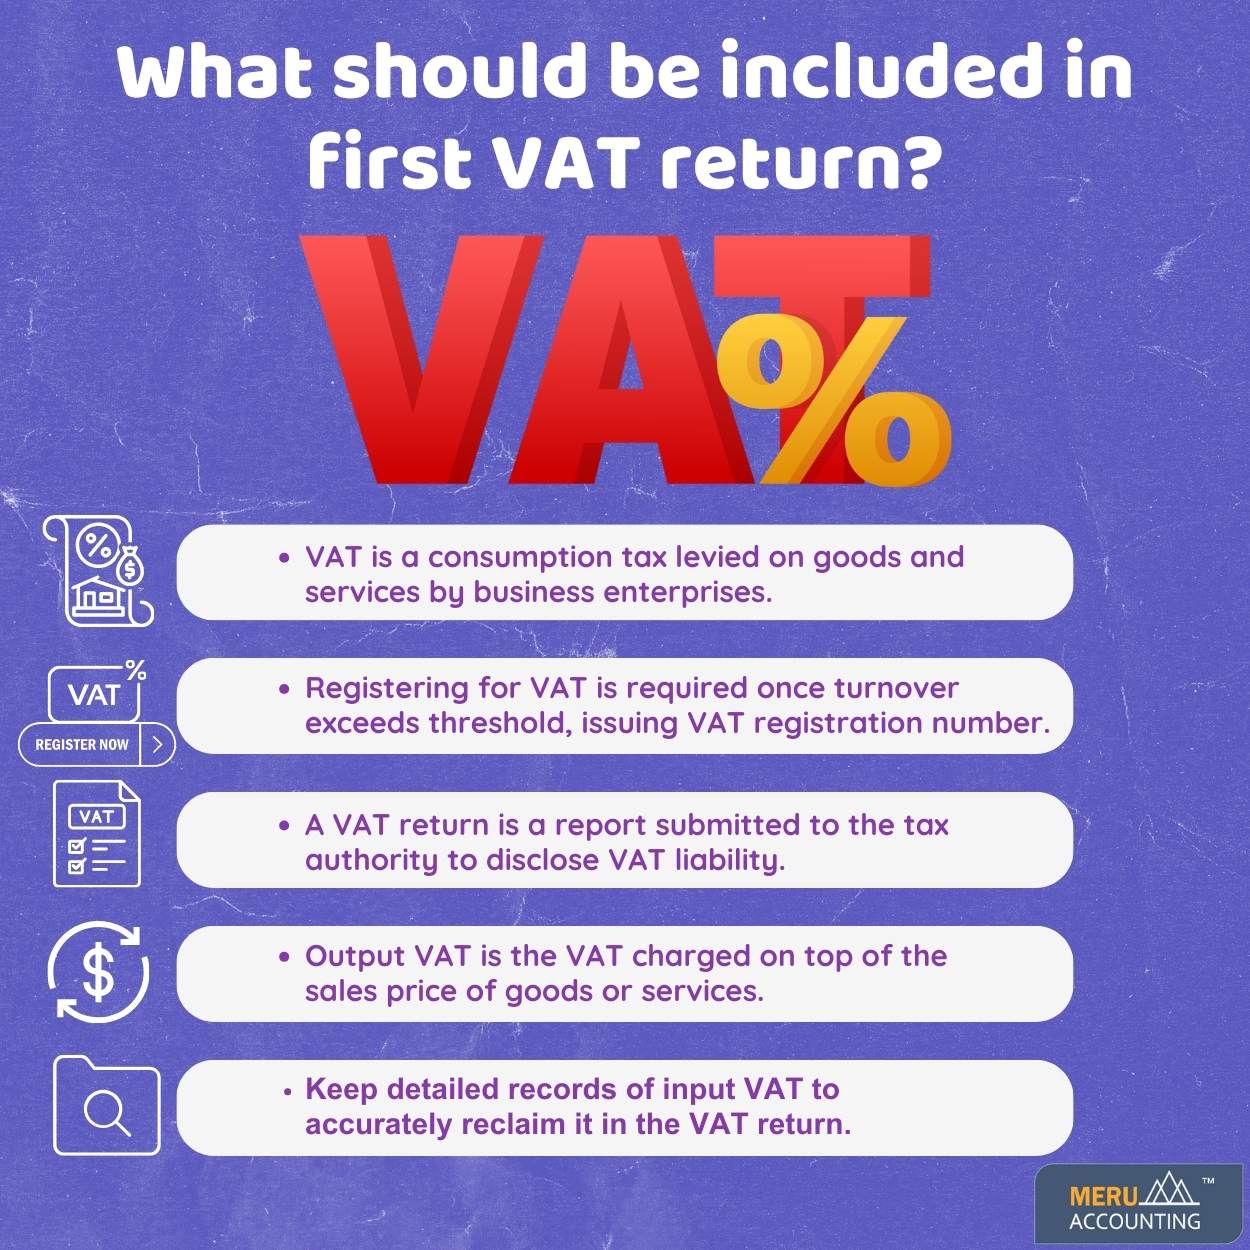 Kloe What should be included in first VAT return Sr no.23 Size 1250 by 1250 V1